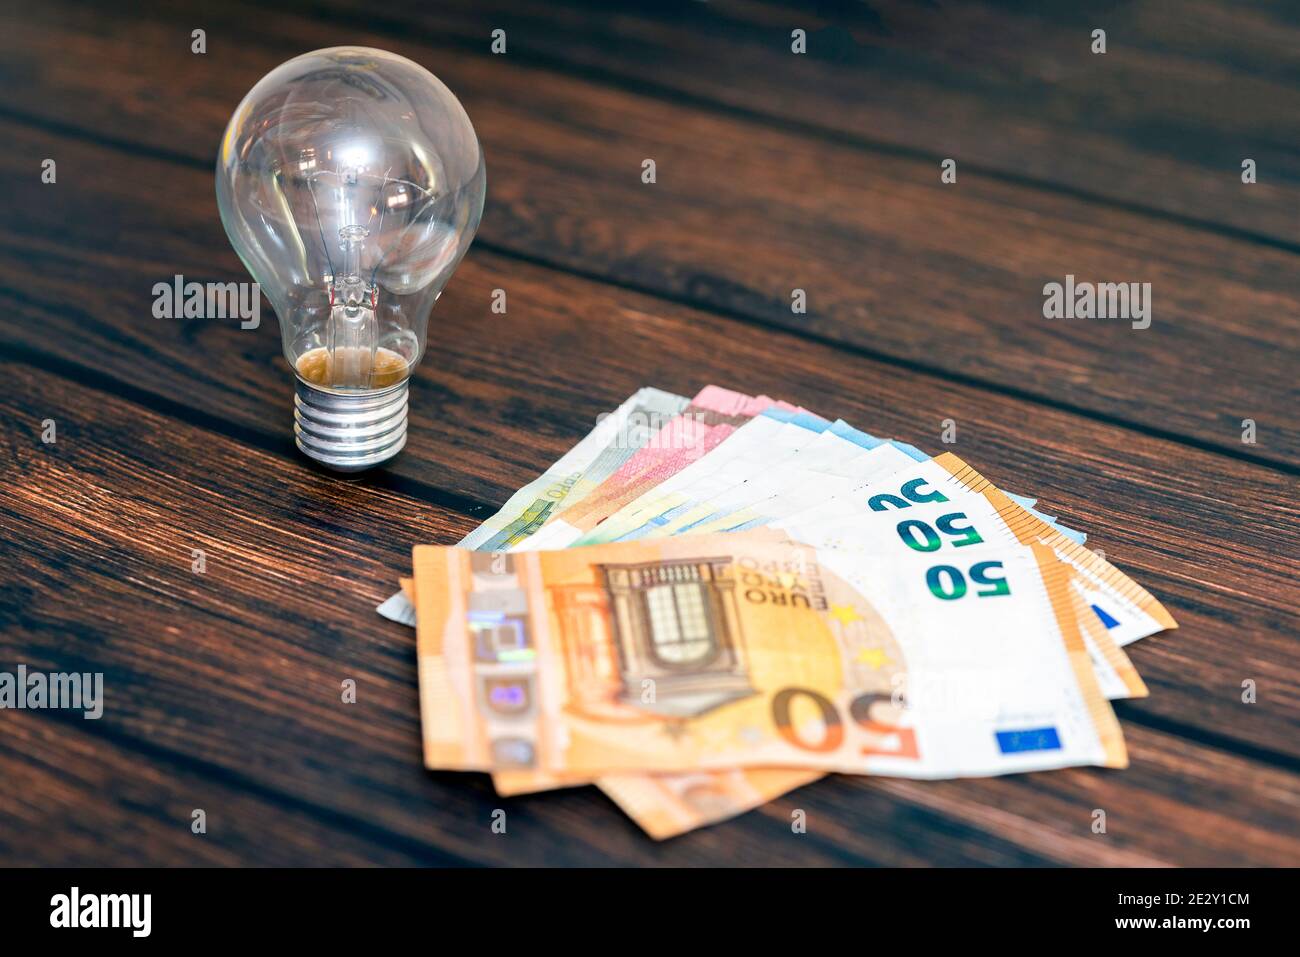 On a wooden background there is a light bulb and money in the form of several bills. Stock Photo